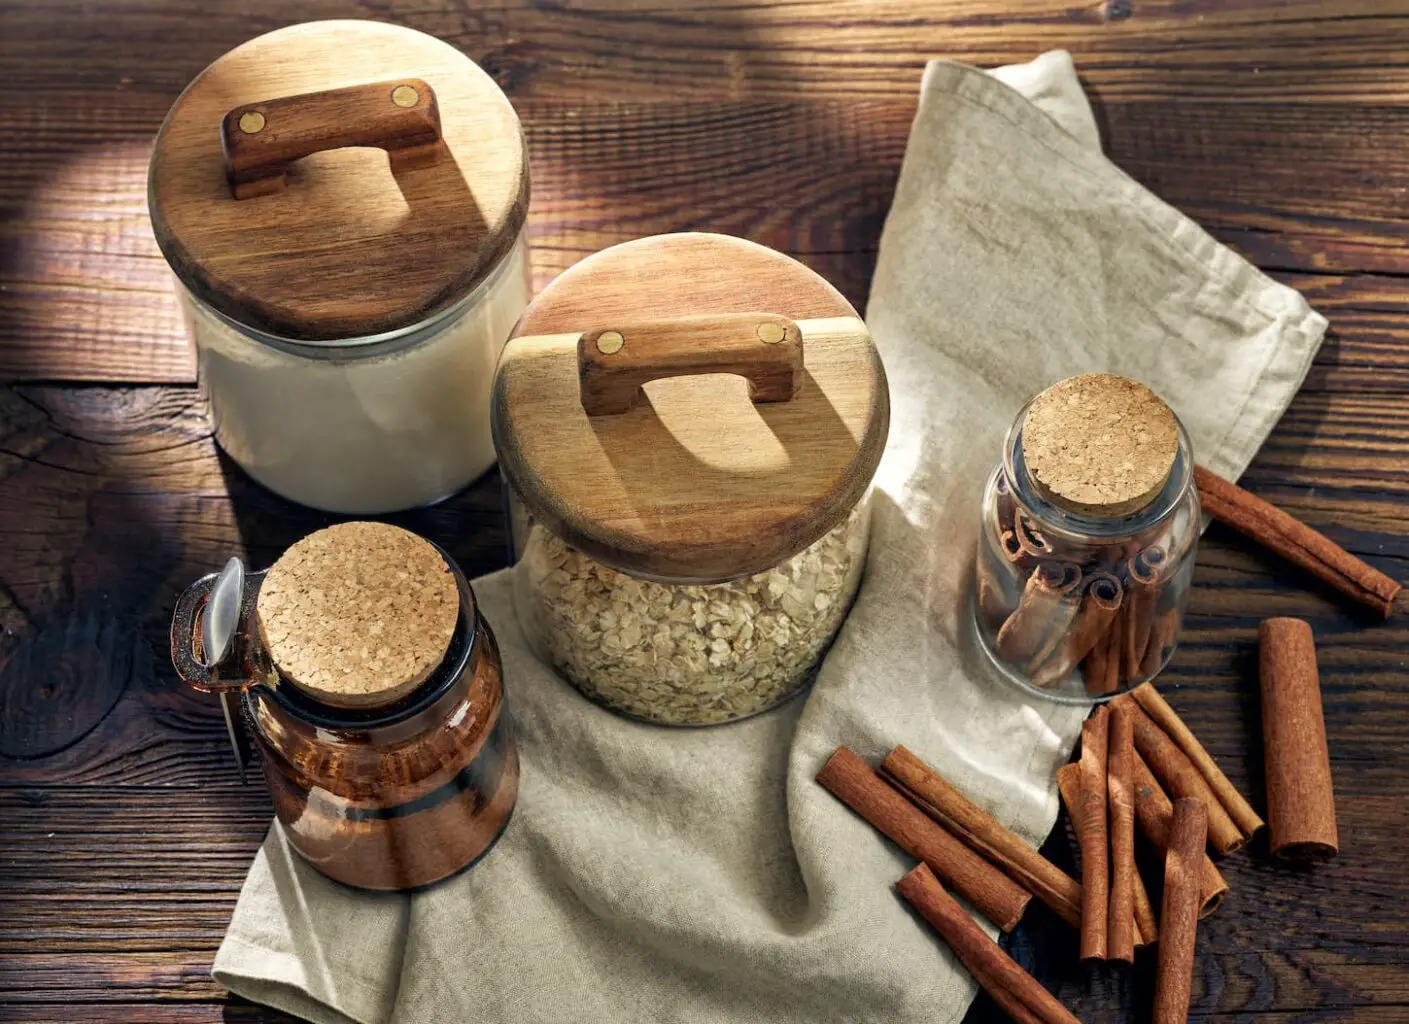 An image of product storage jars on a brown wooden kitchen table.